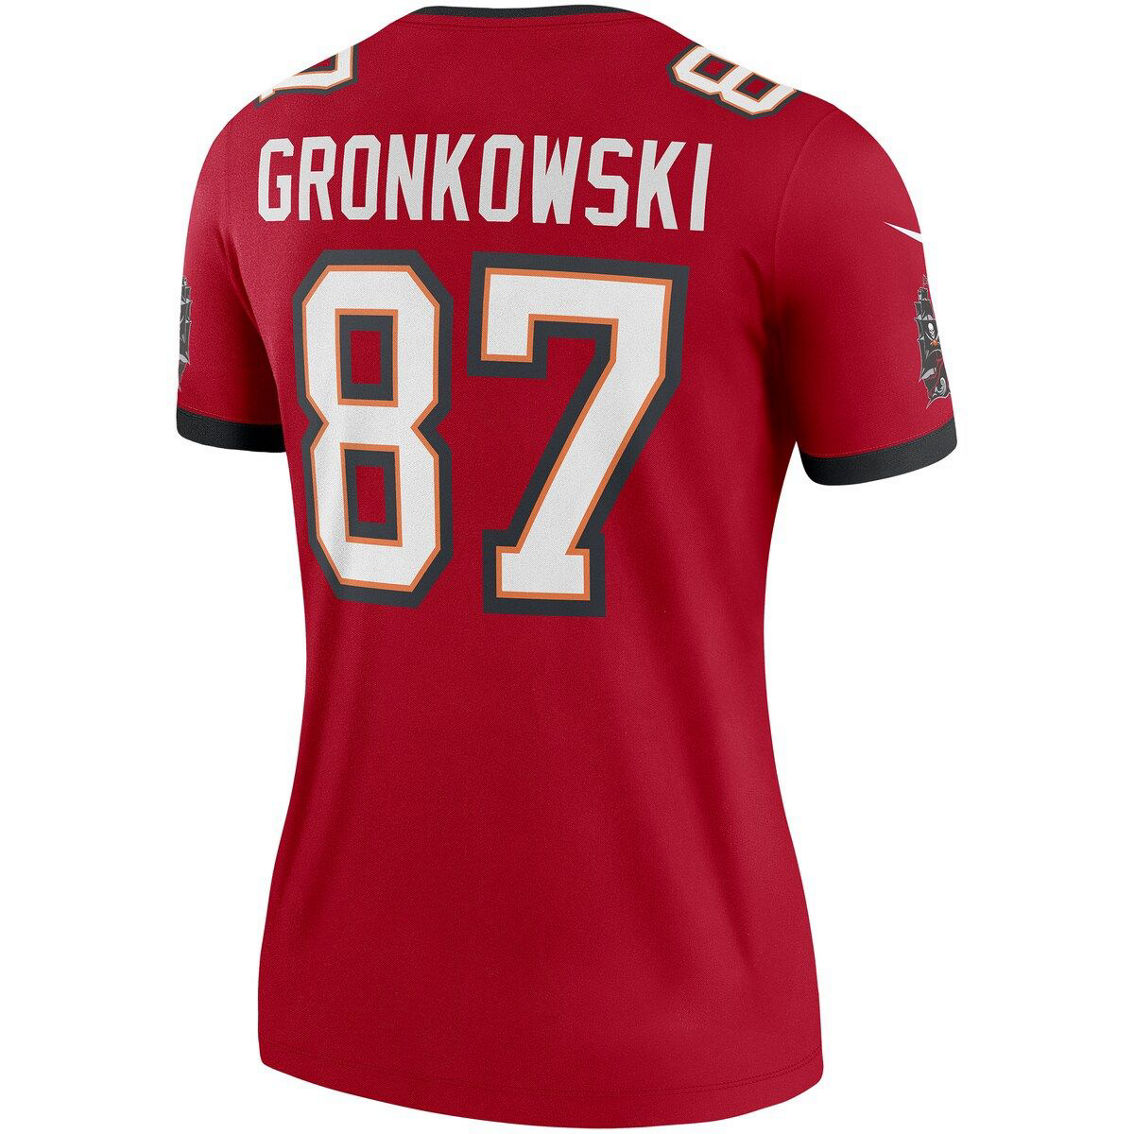 Nike Women's Rob Gronkowski Red Tampa Bay Buccaneers Legend Jersey - Image 4 of 4